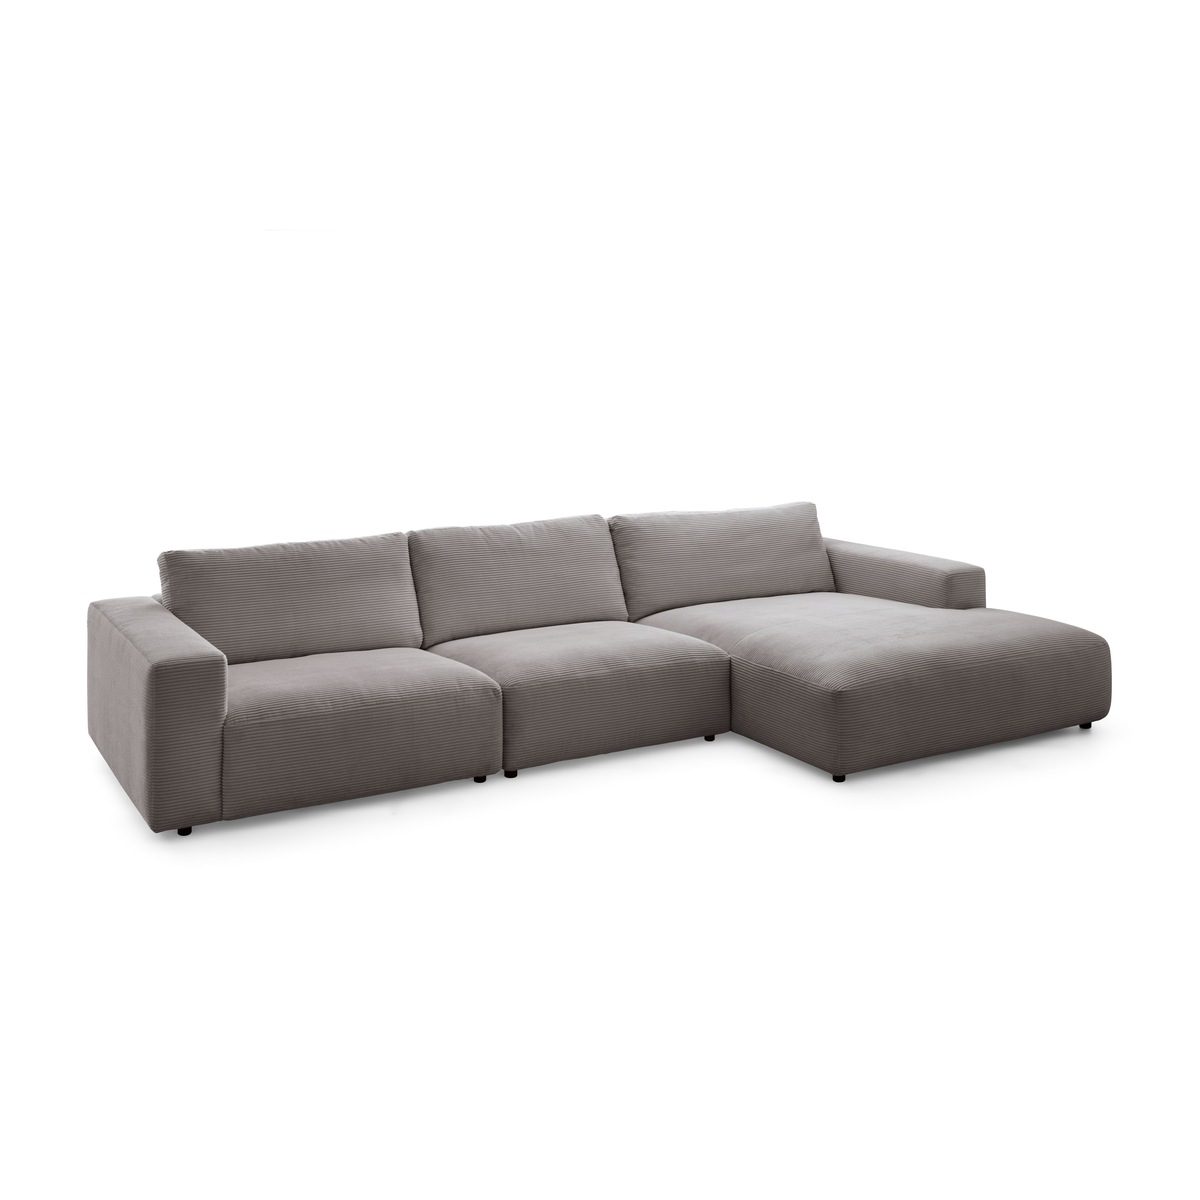 Sitzer Sofa M 3,5 Musterring by Lucia branded Cord Gallery